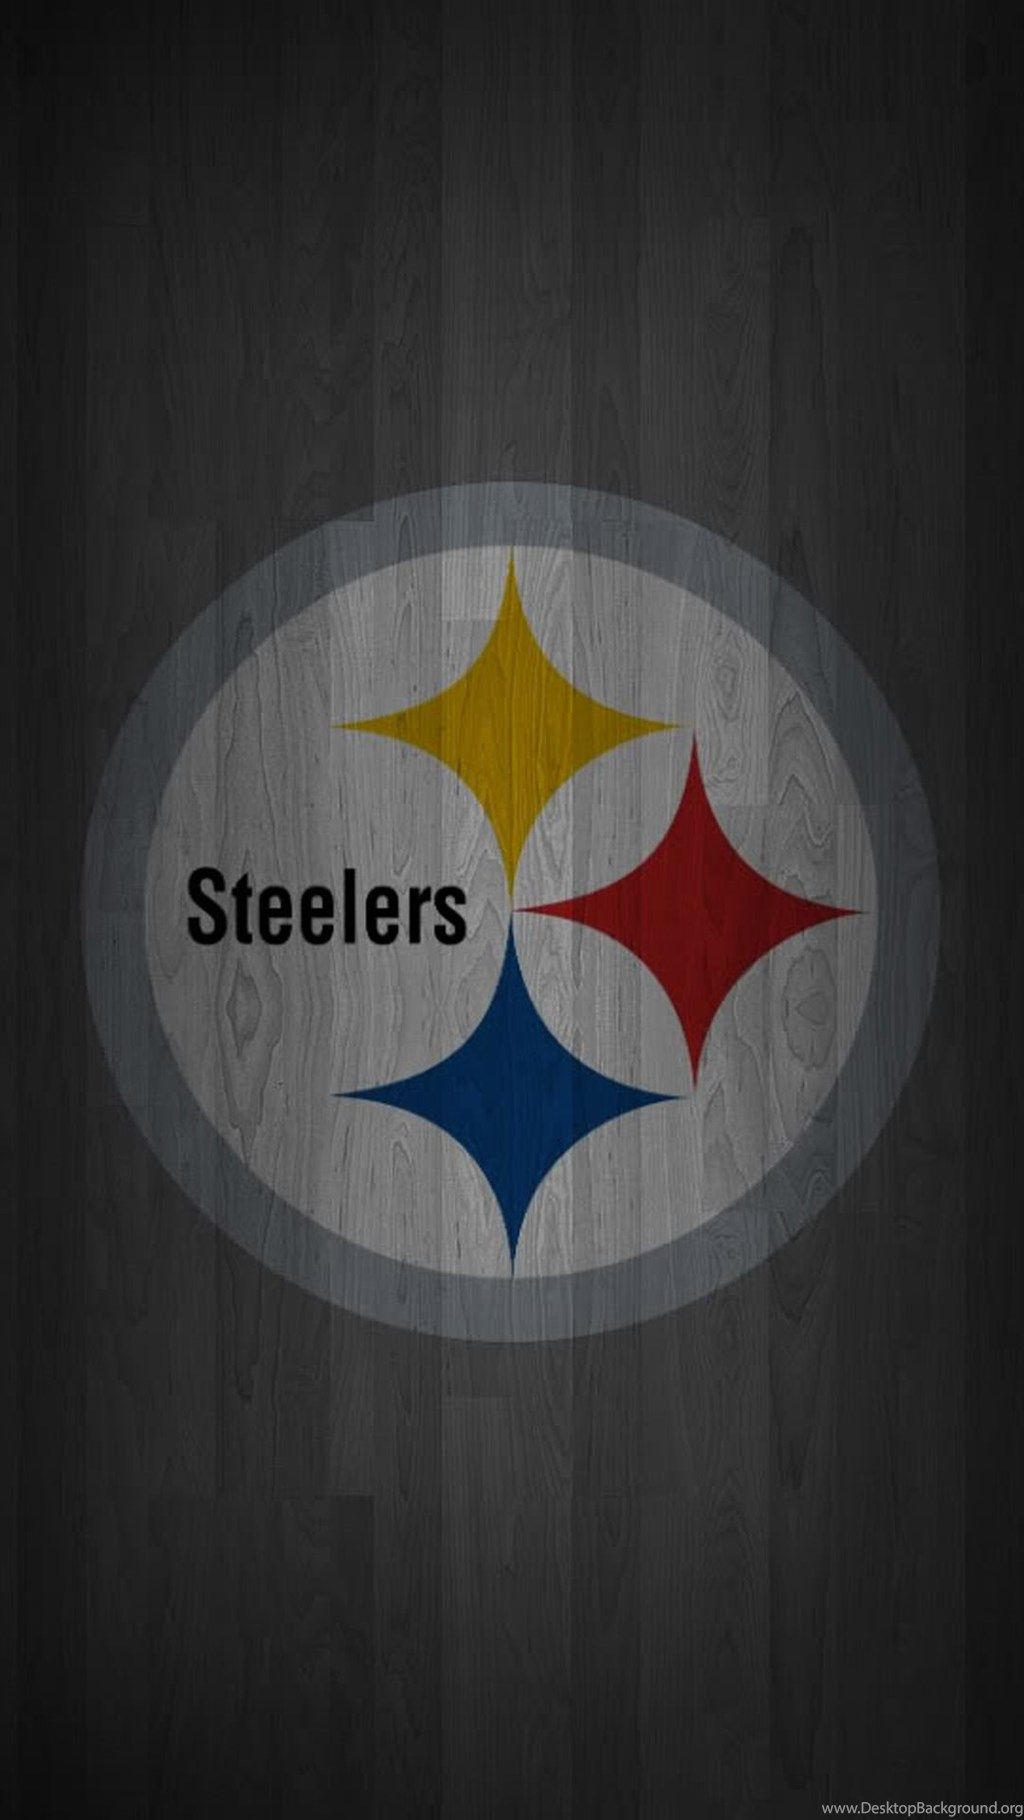 Steelers Iphone Background